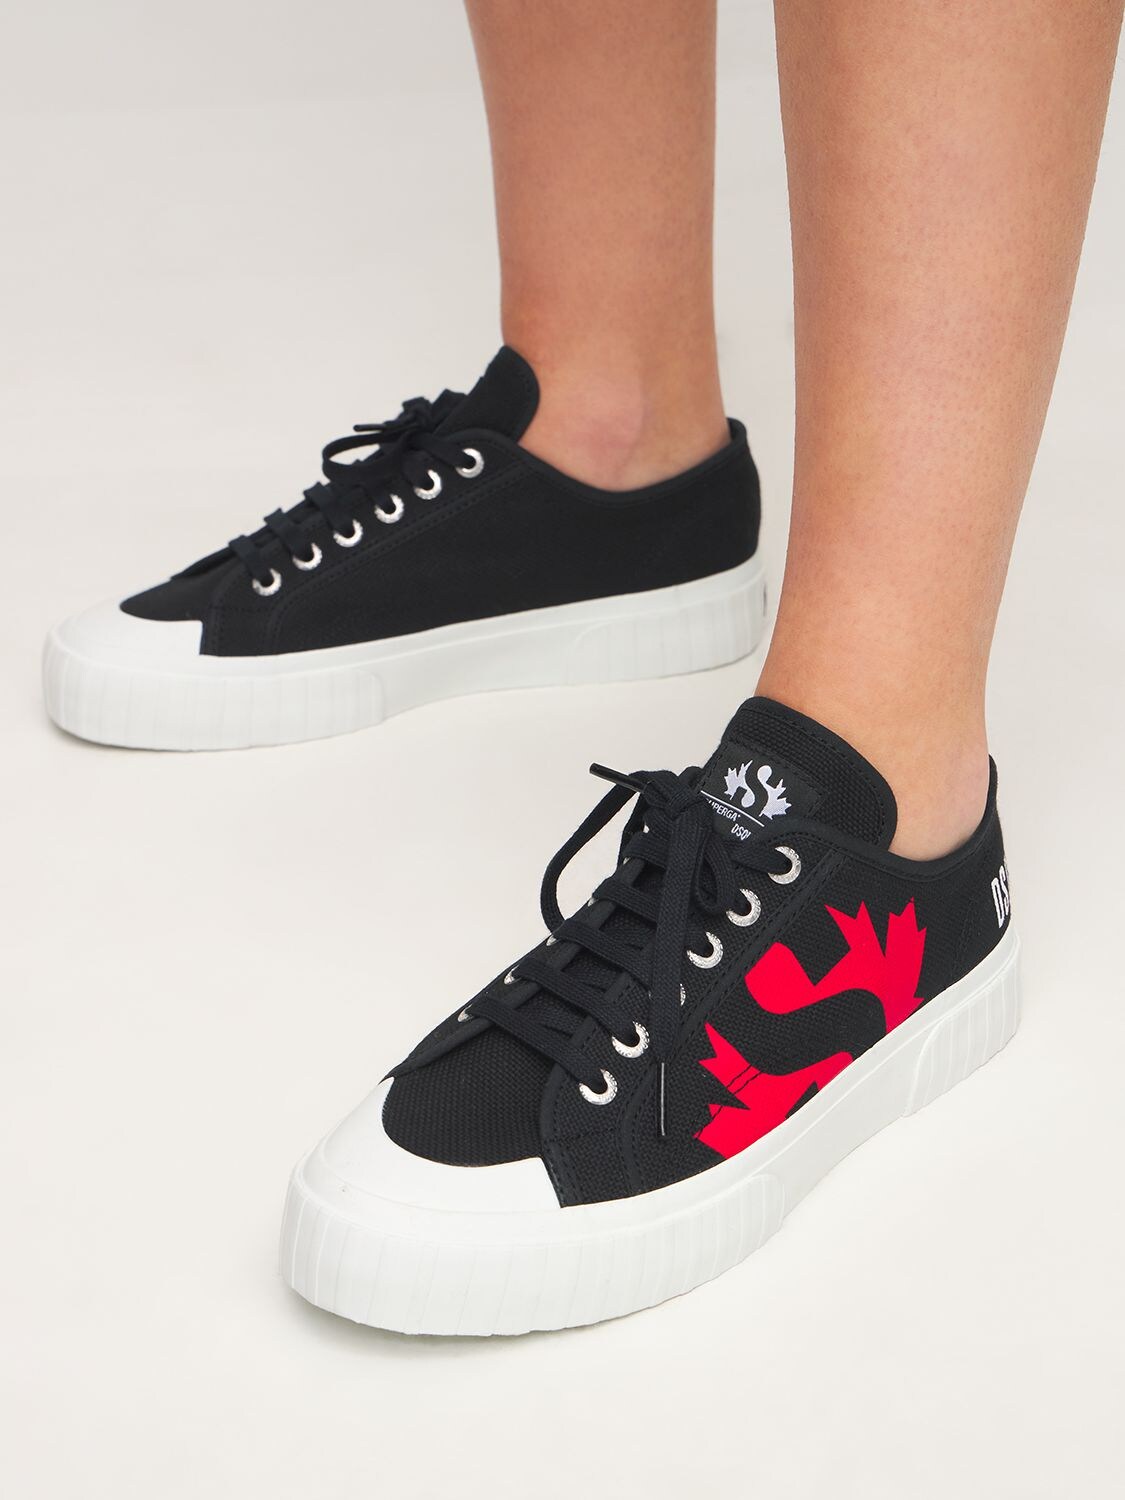 DSQUARED2 PRINTED COTTON CANVAS LACE-UP SNEAKERS